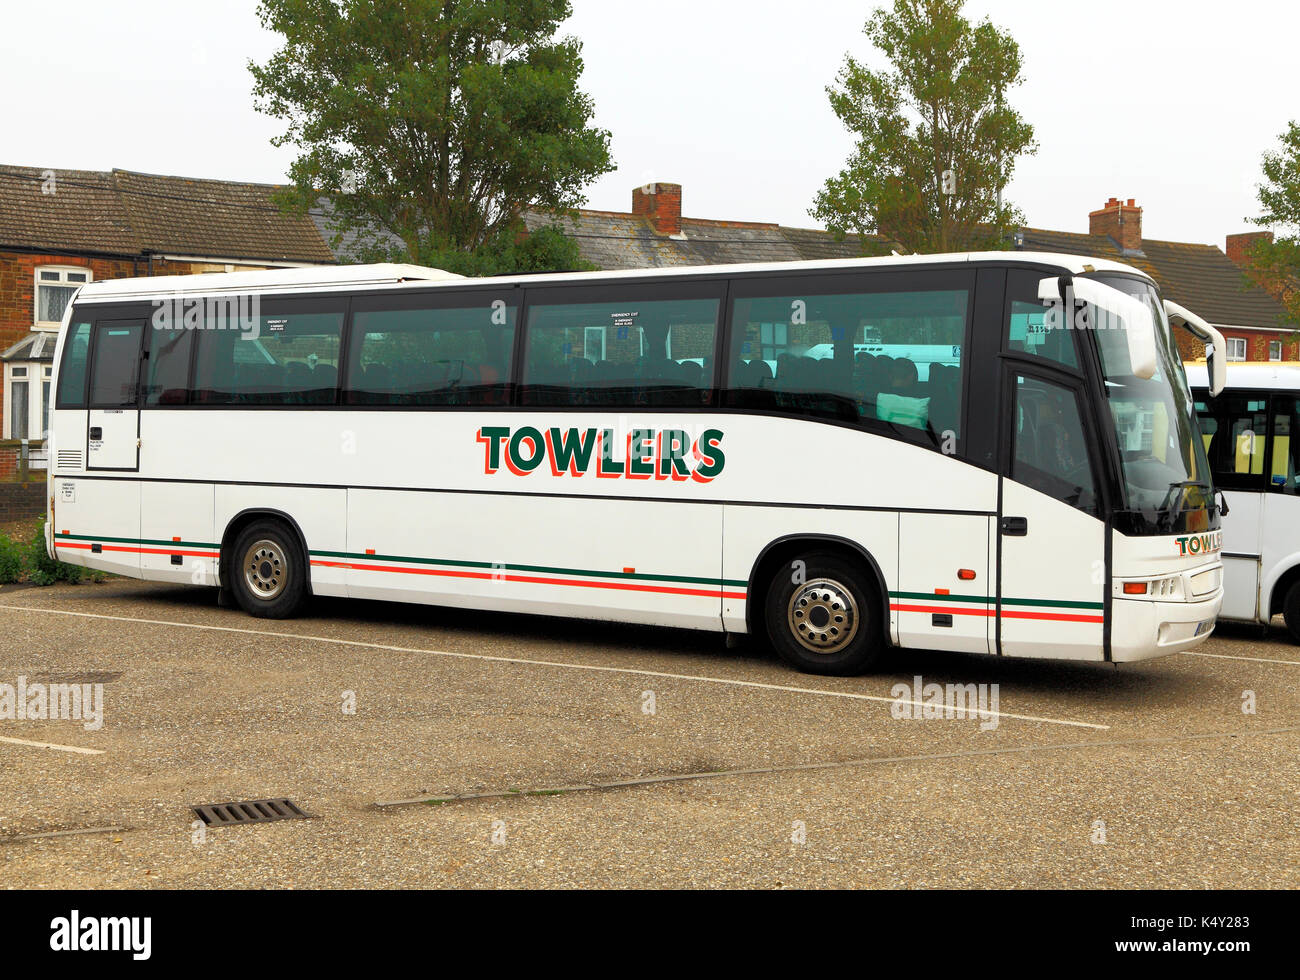 Towlers Coaches, coach, day trips, trip, excursions, excursion,  travel company, companies, holiday, holidays, travel, transport, bus, England, UK Stock Photo